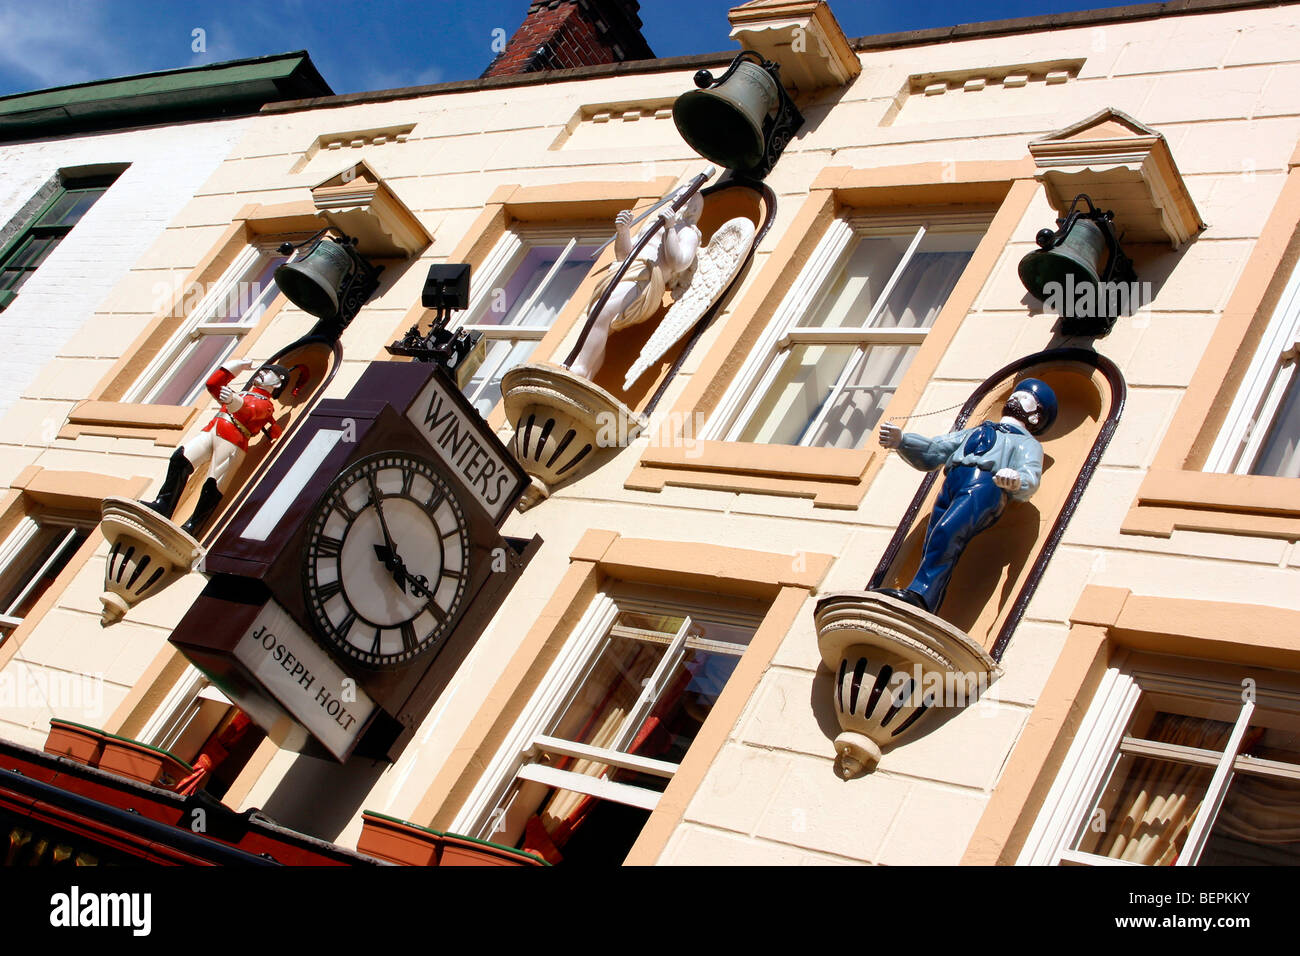 England, Cheshire, Stockport, Little Underbank Winters former jeweller's shop animated clock Stock Photo